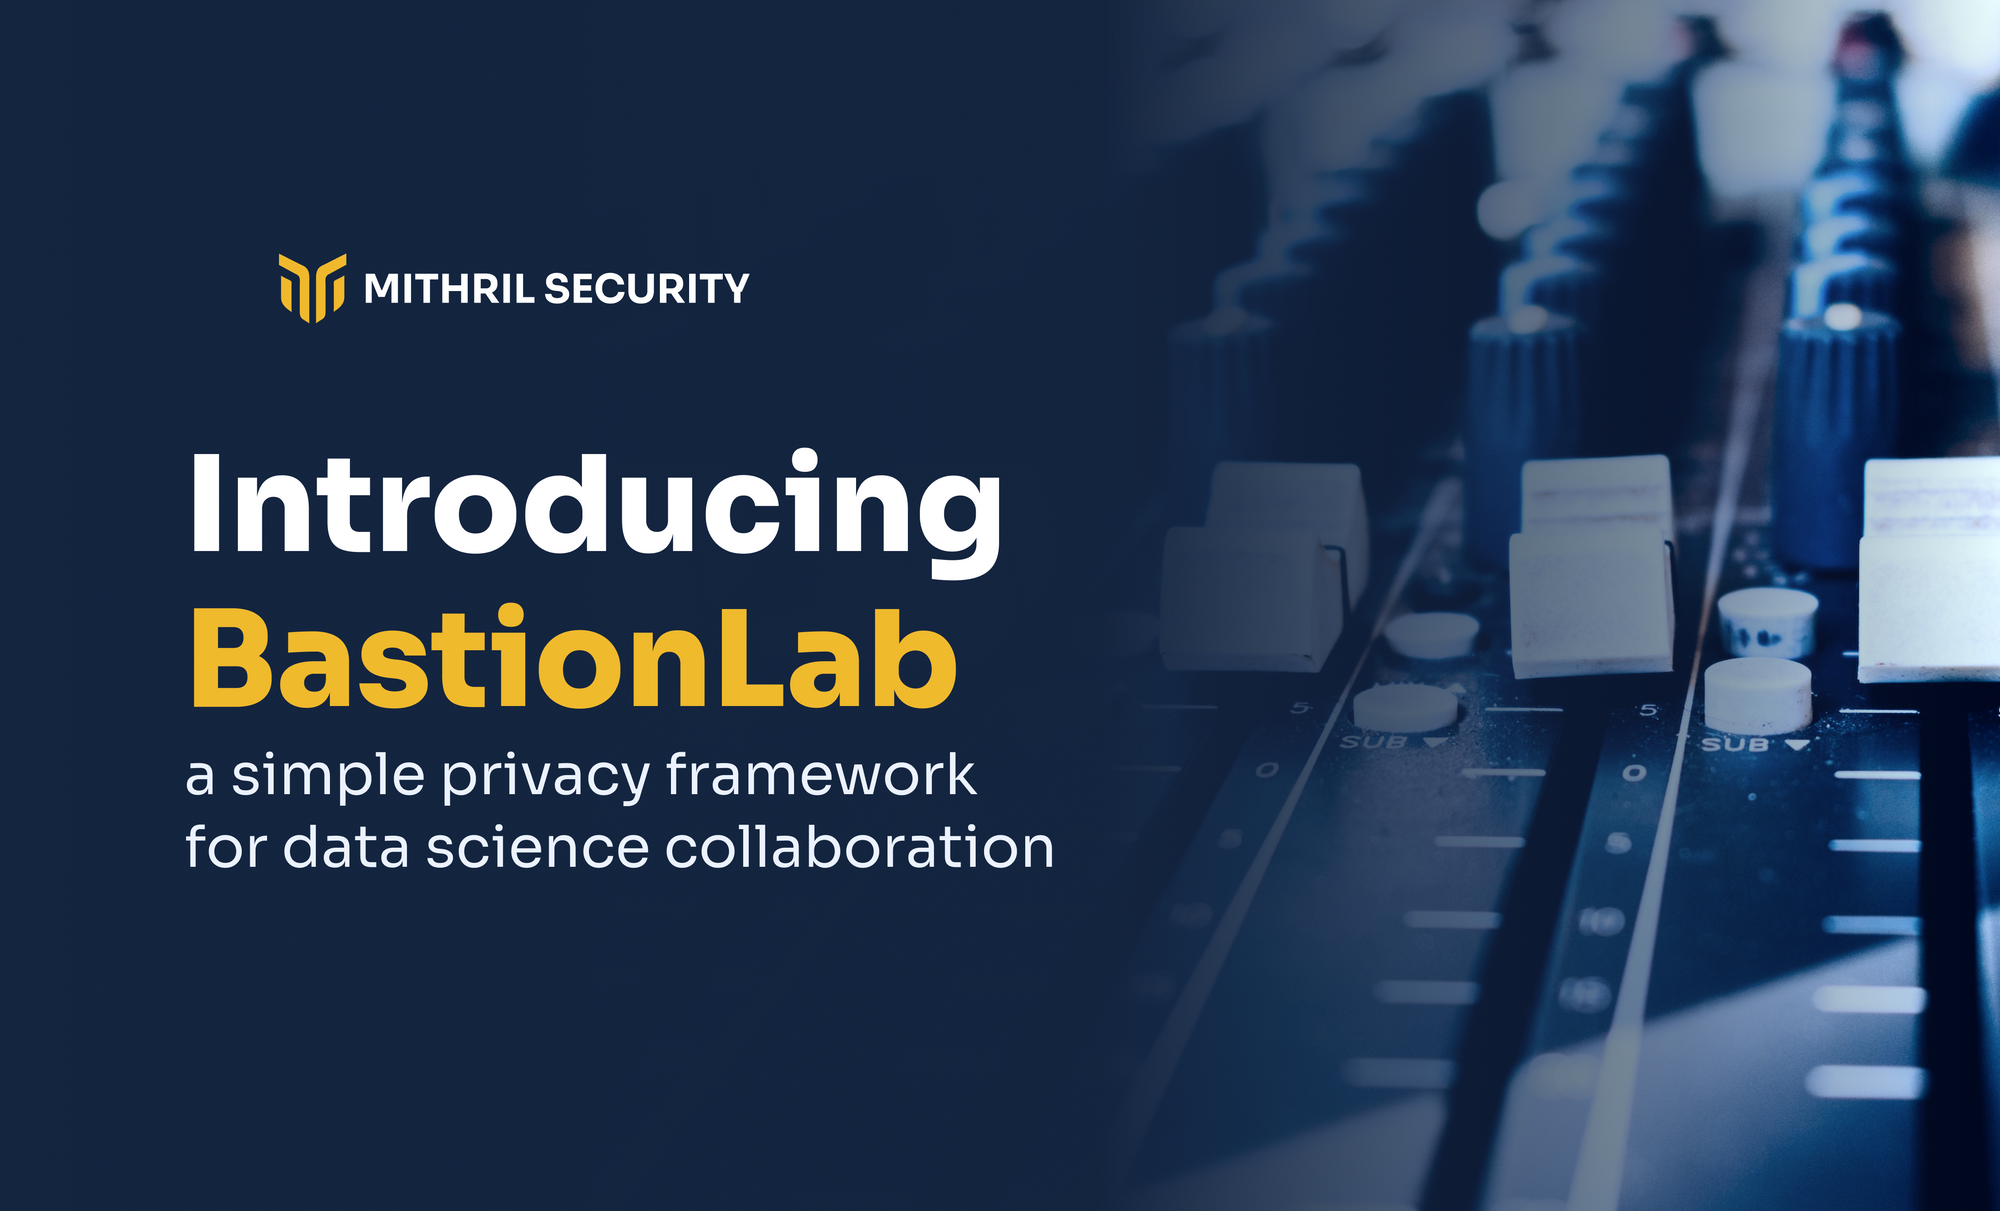 Introducing BastionLab - A simple privacy framework for data science collaboration